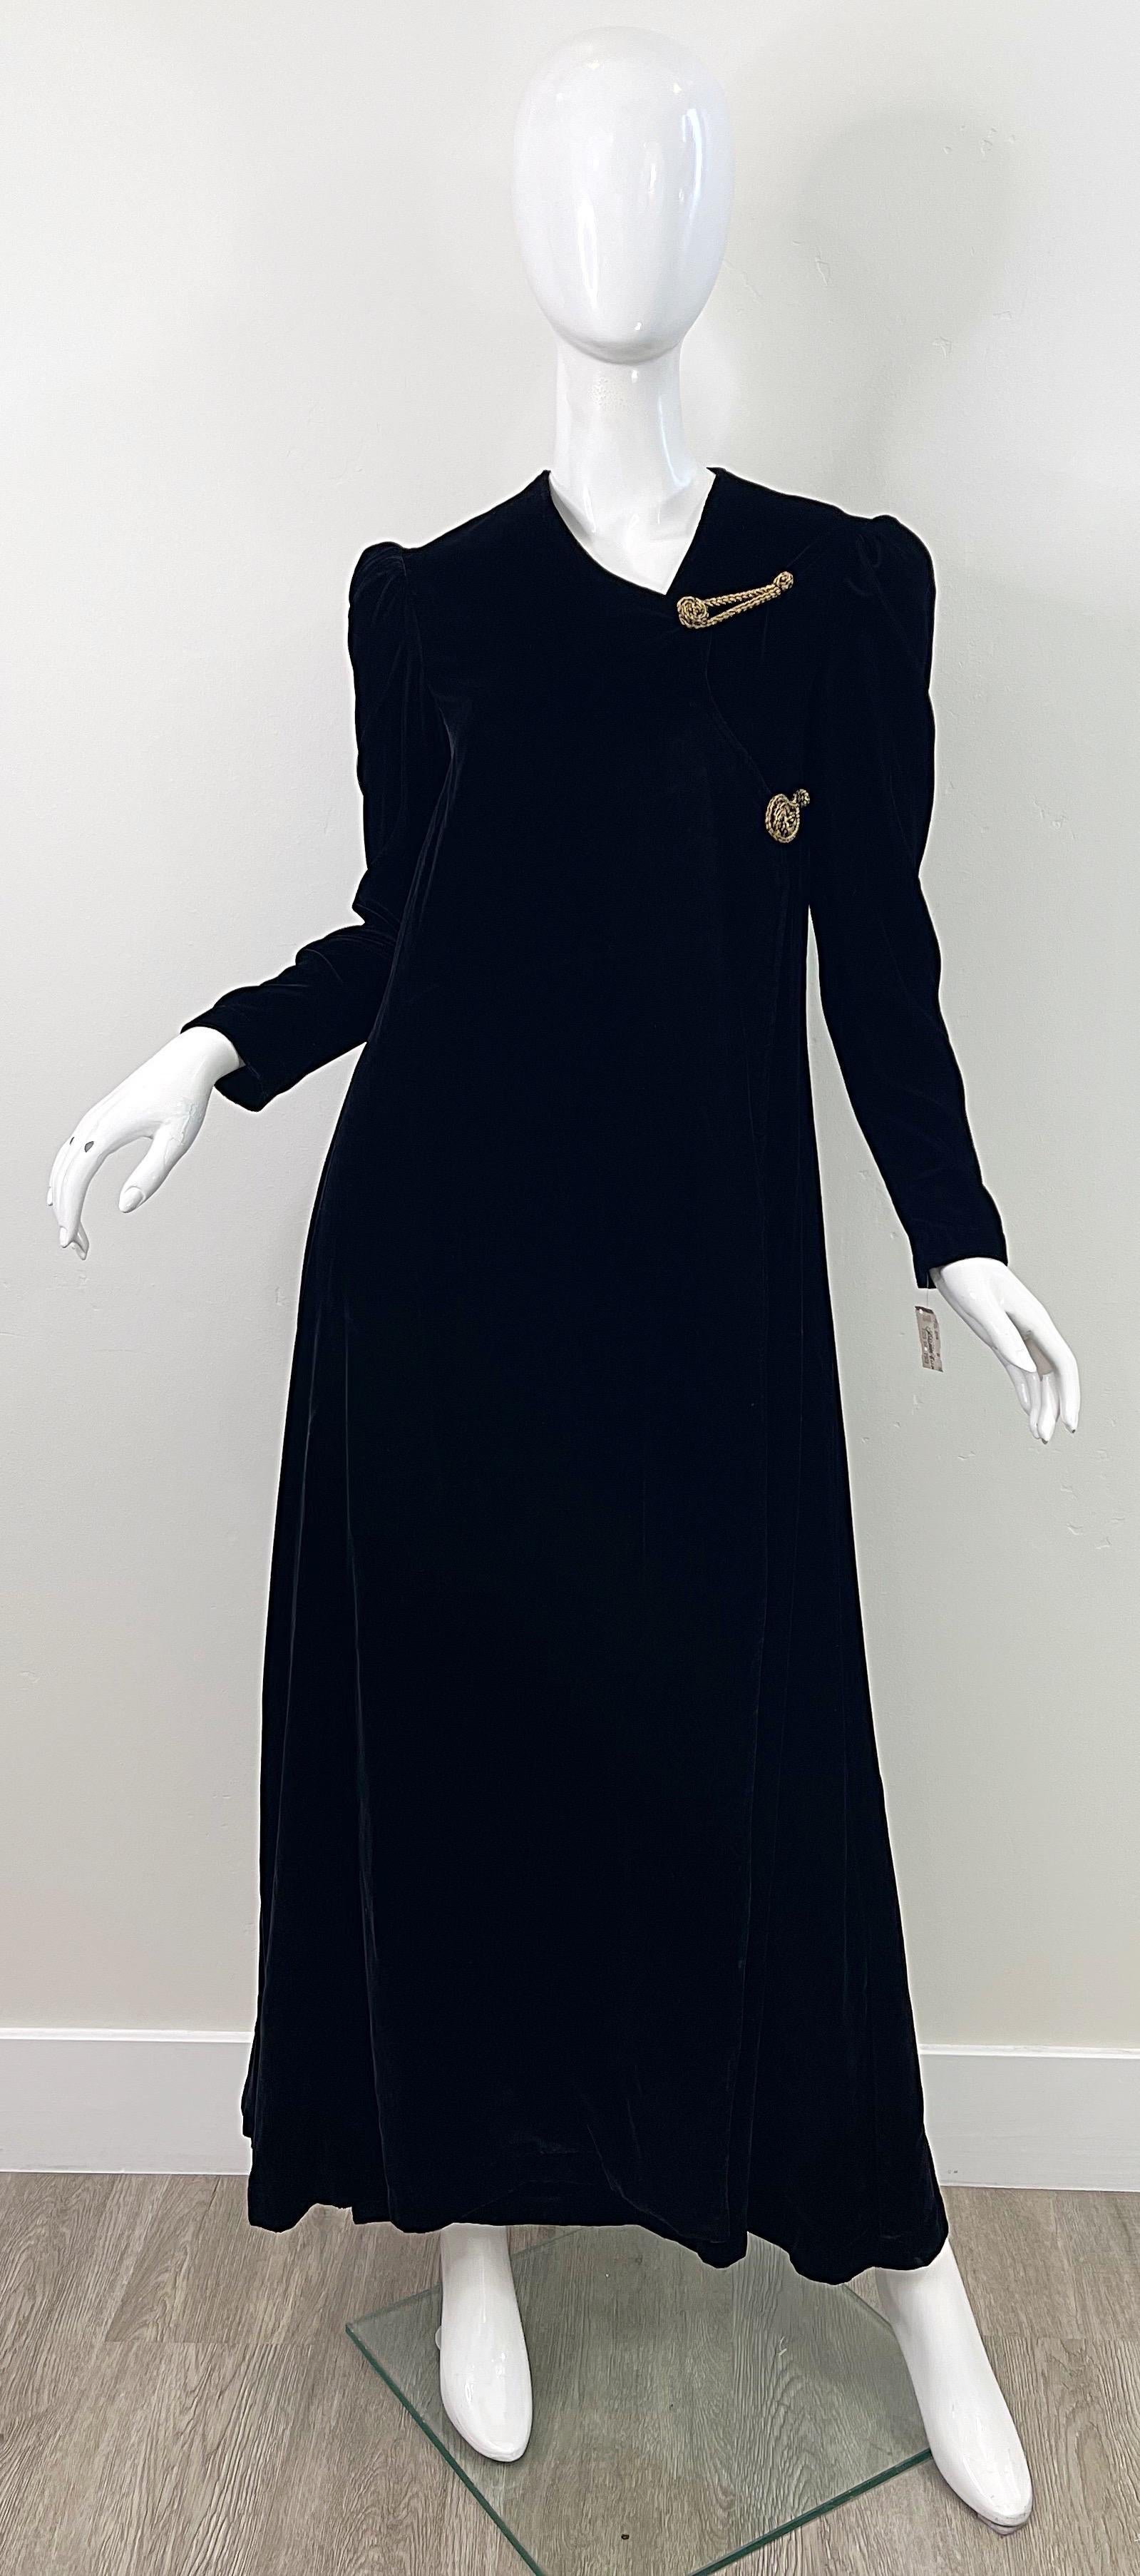 NWT deadstock SABETH ROW New York black sill velvet wrap robe dress ! Luxurious soft velvet drapes the body beautifully. Inner ties at waist. Woven gold silk frog closure at neck and bust. 
In great unworn condition with Saks Fifth Ave store tags